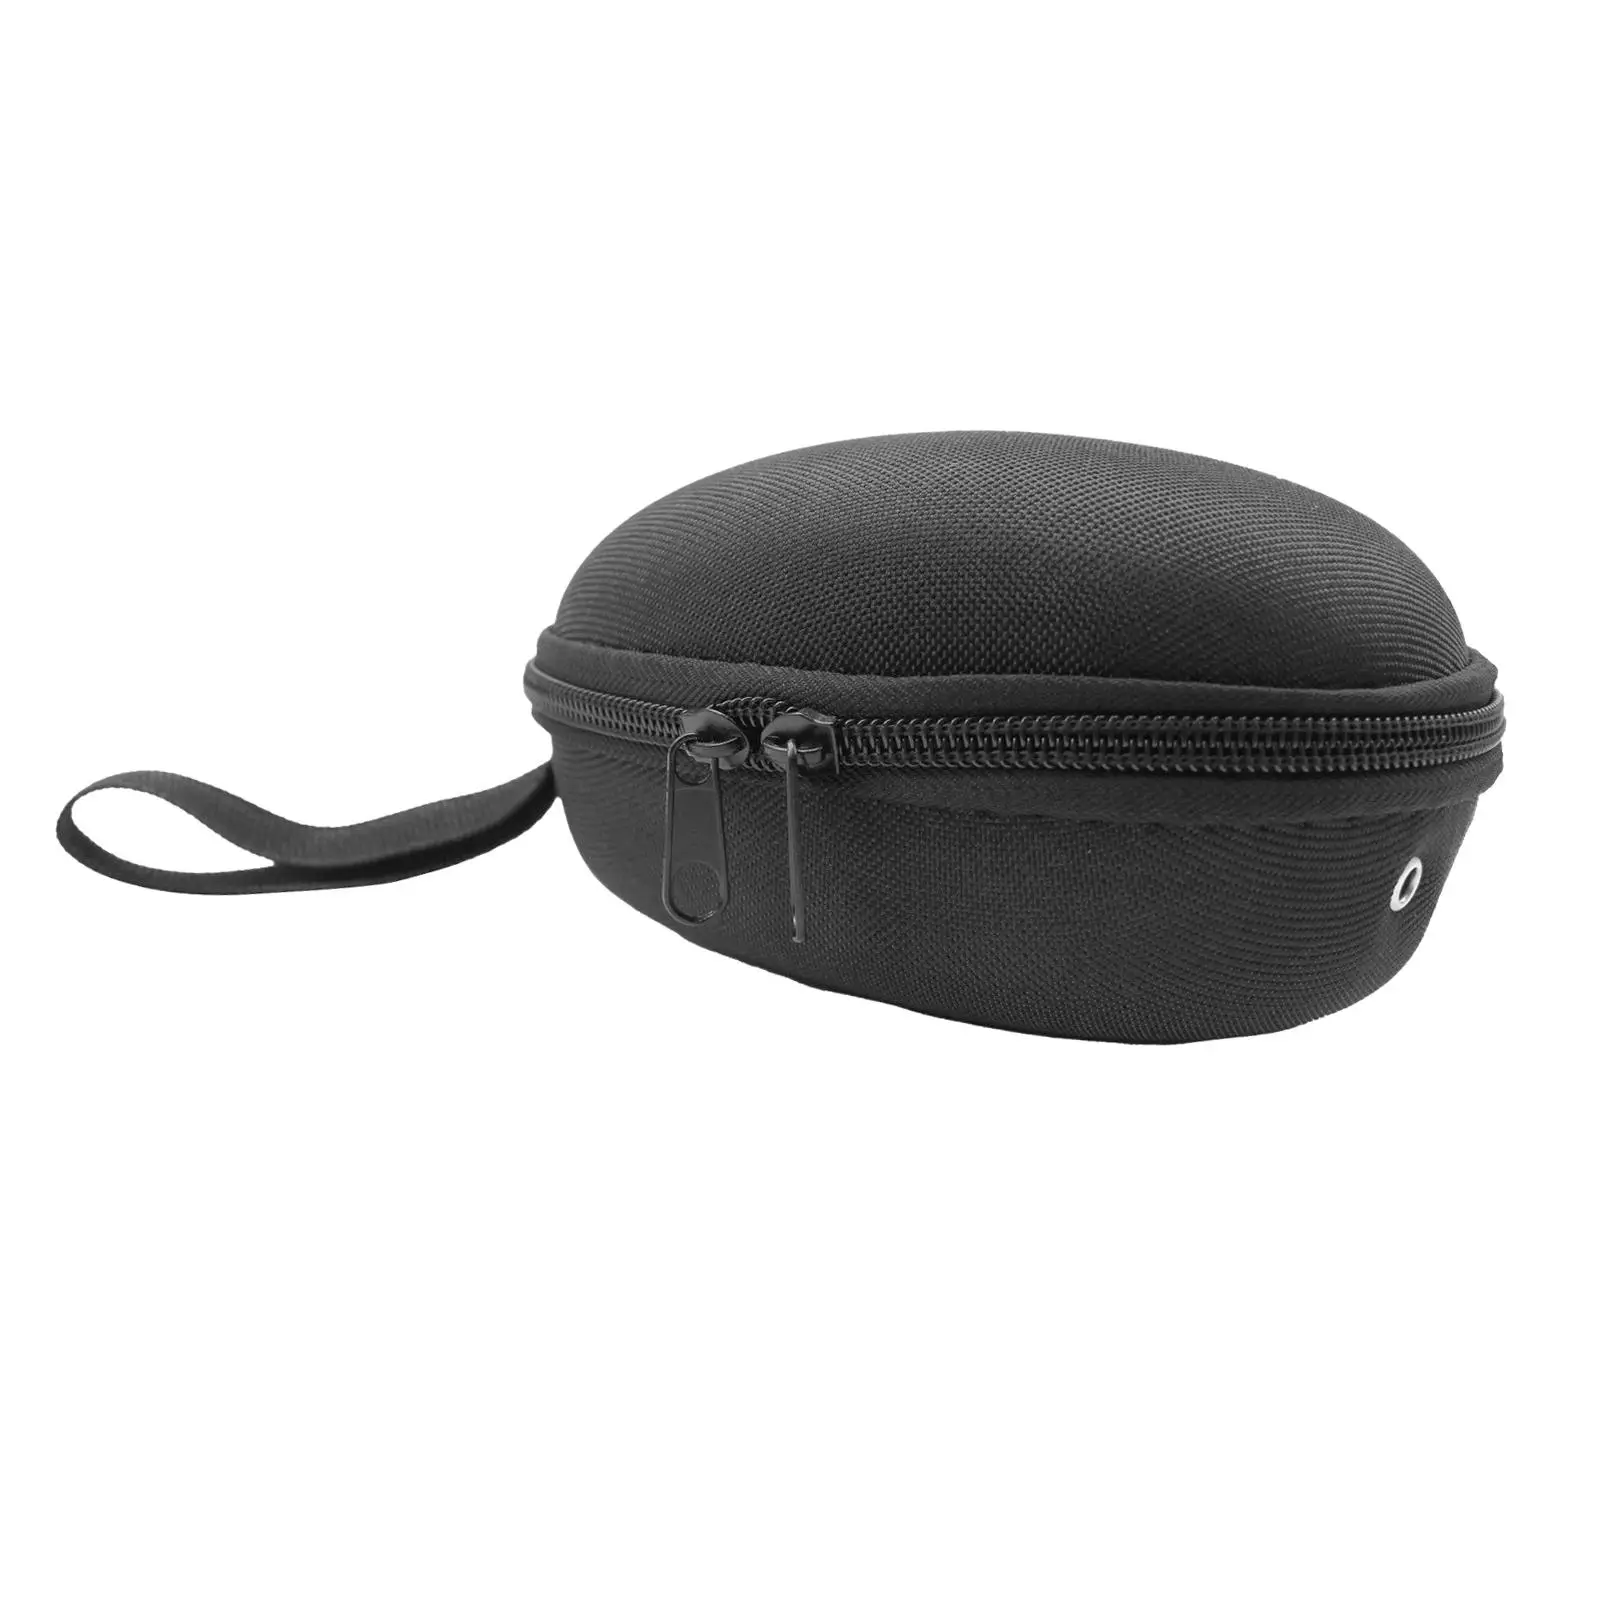 Portable Fishing Reel Cover Protective Case Fishing Gear Organizer Durable Protector EVA Fishing Pouch Bag for Bait Casting Drum